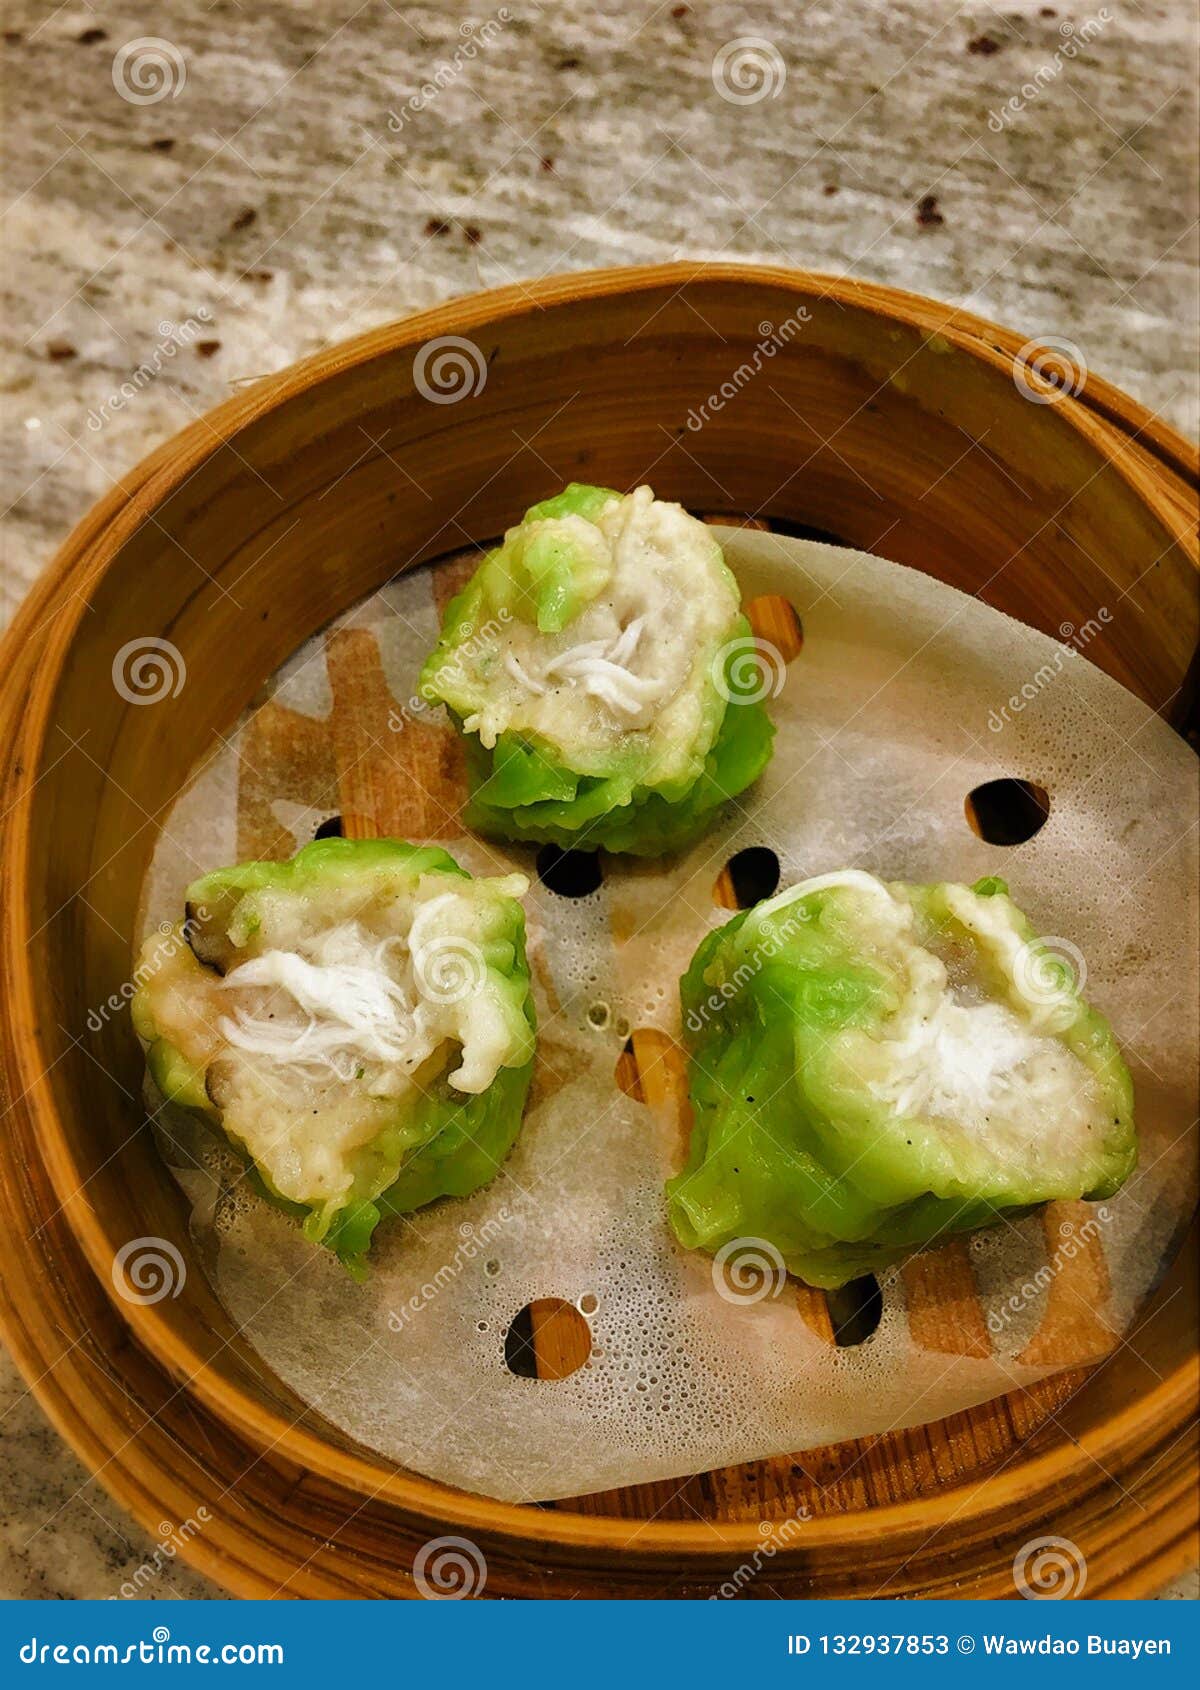 Steamed Crab Meat Dumpling in a Steaming Rattan Tray Stock Image ...